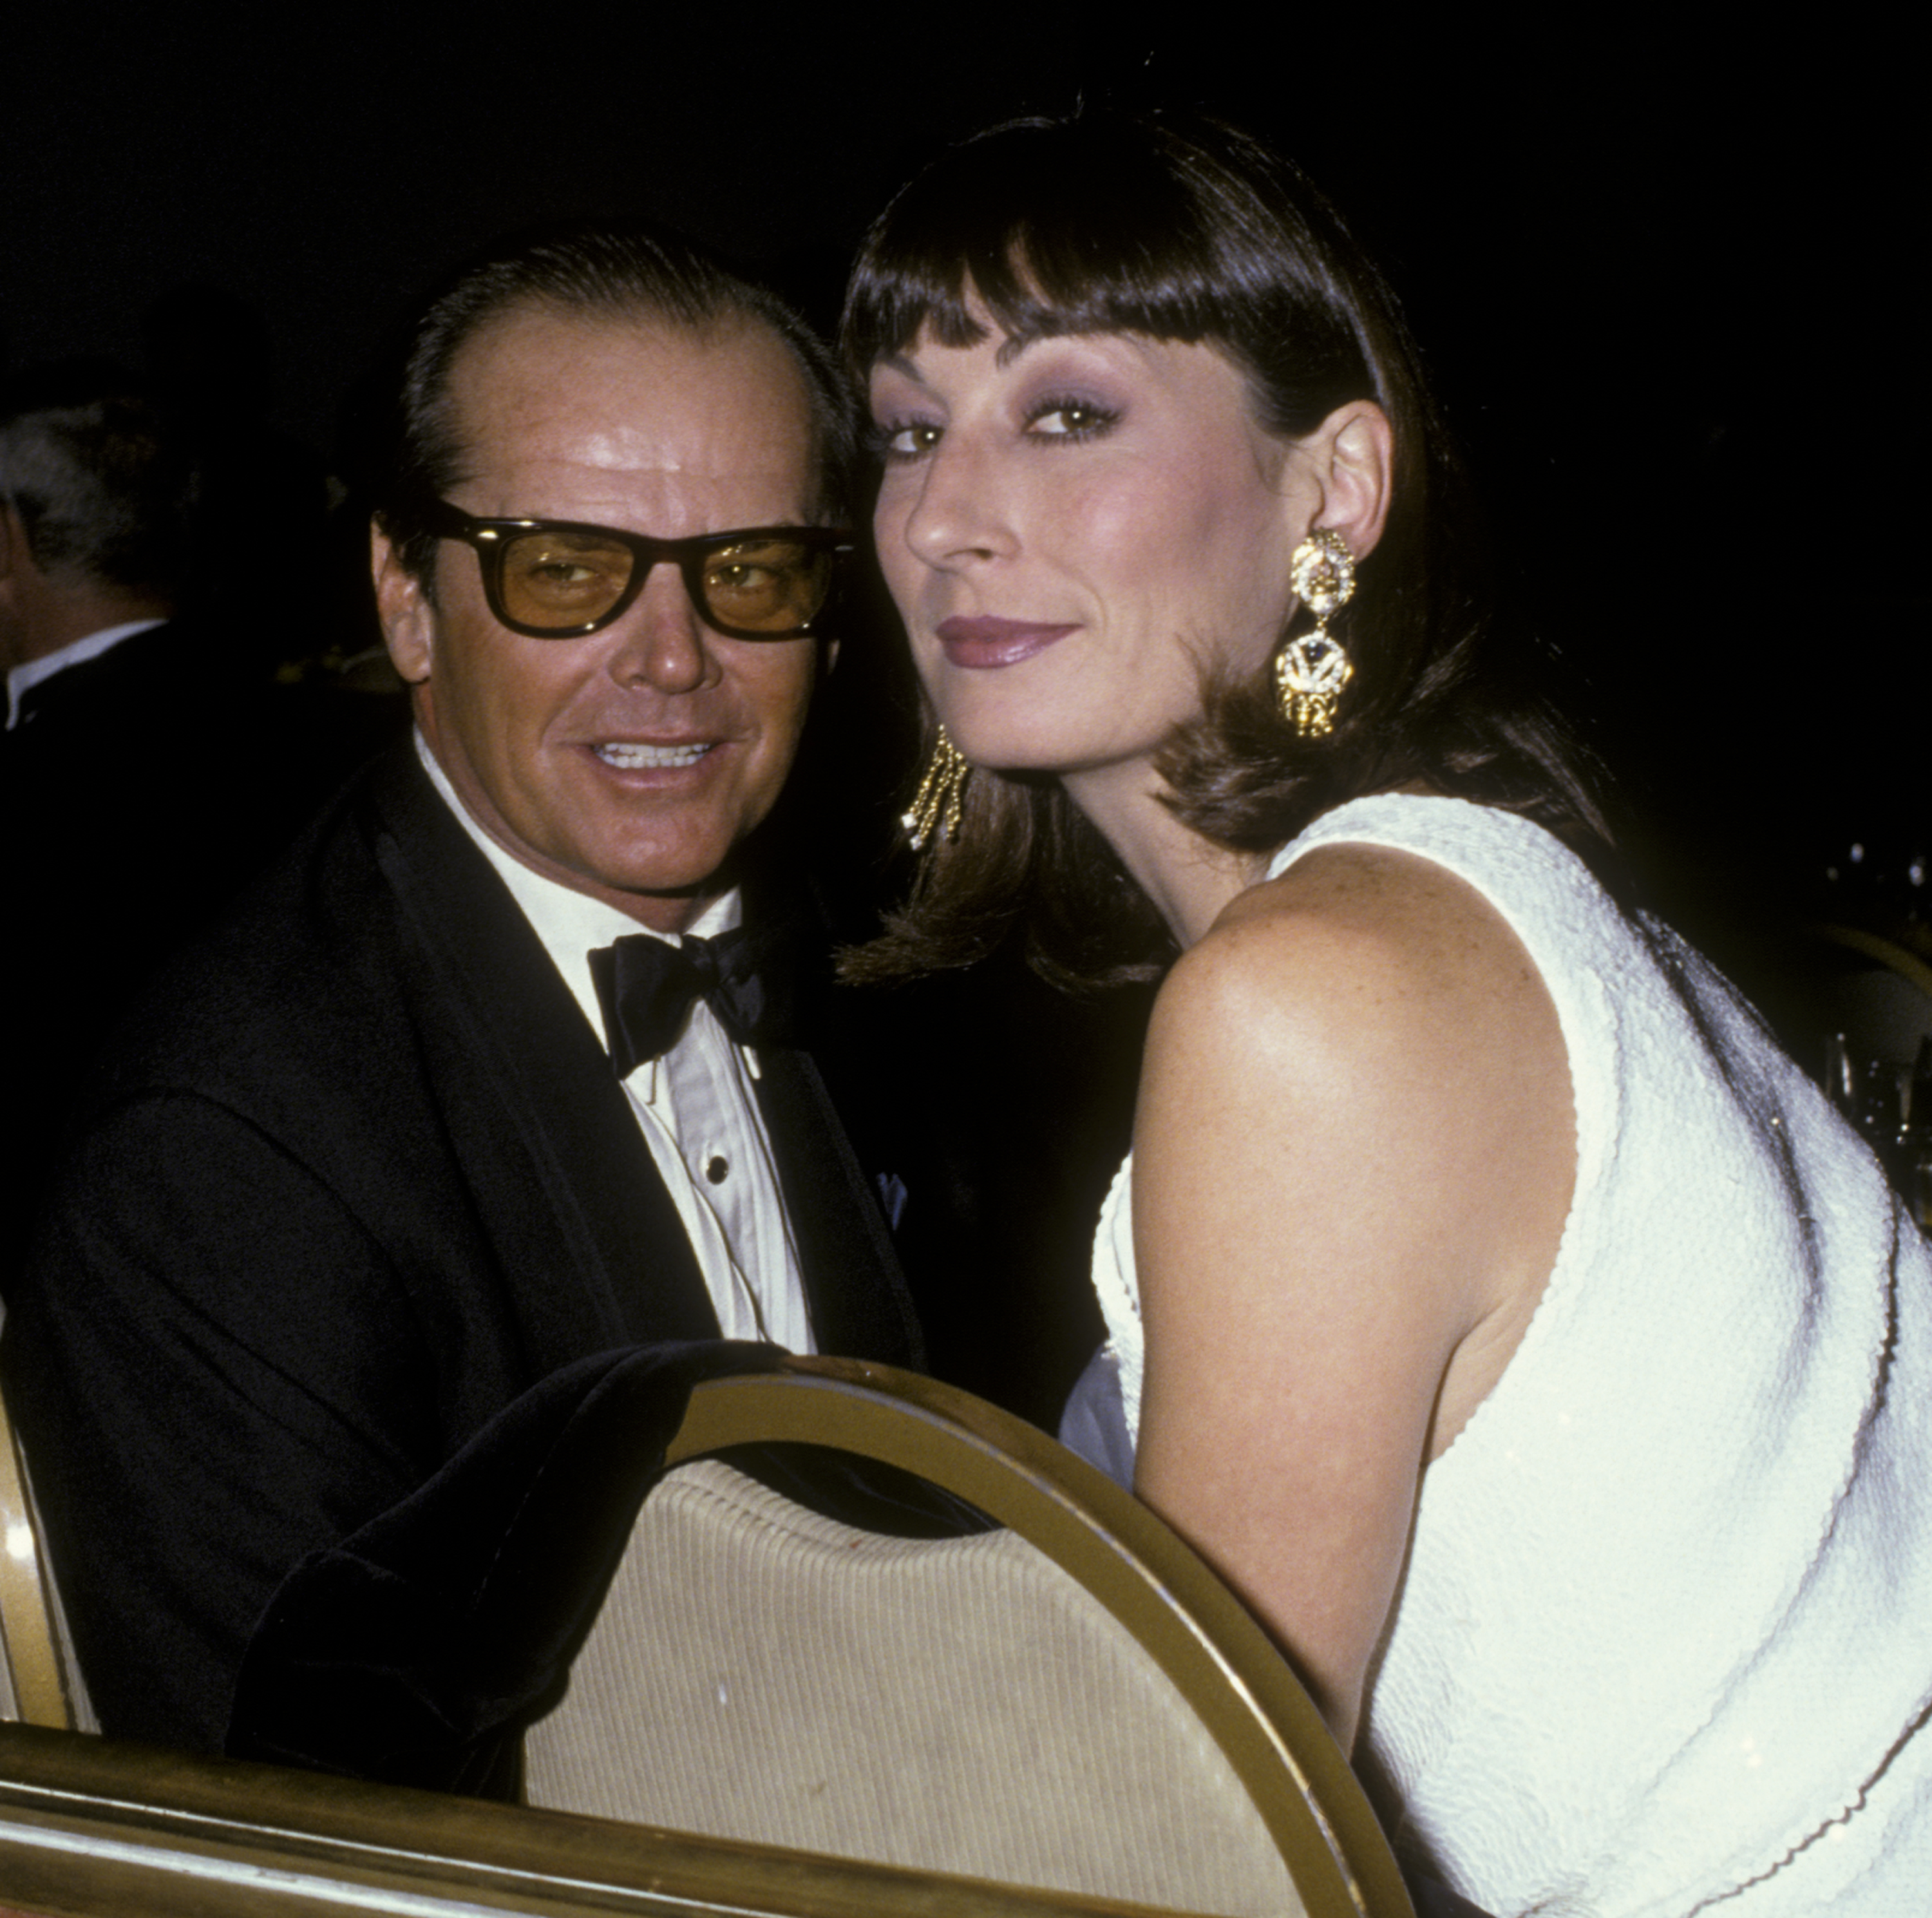 Actor Jack Nicholson and Anjelica Huston attend the 38th Annual Directors' Guild of America Awards on March 8, 1986 at the Beverly Hilton Hotel in Beverly Hills, California.  |  Source: Getty Images